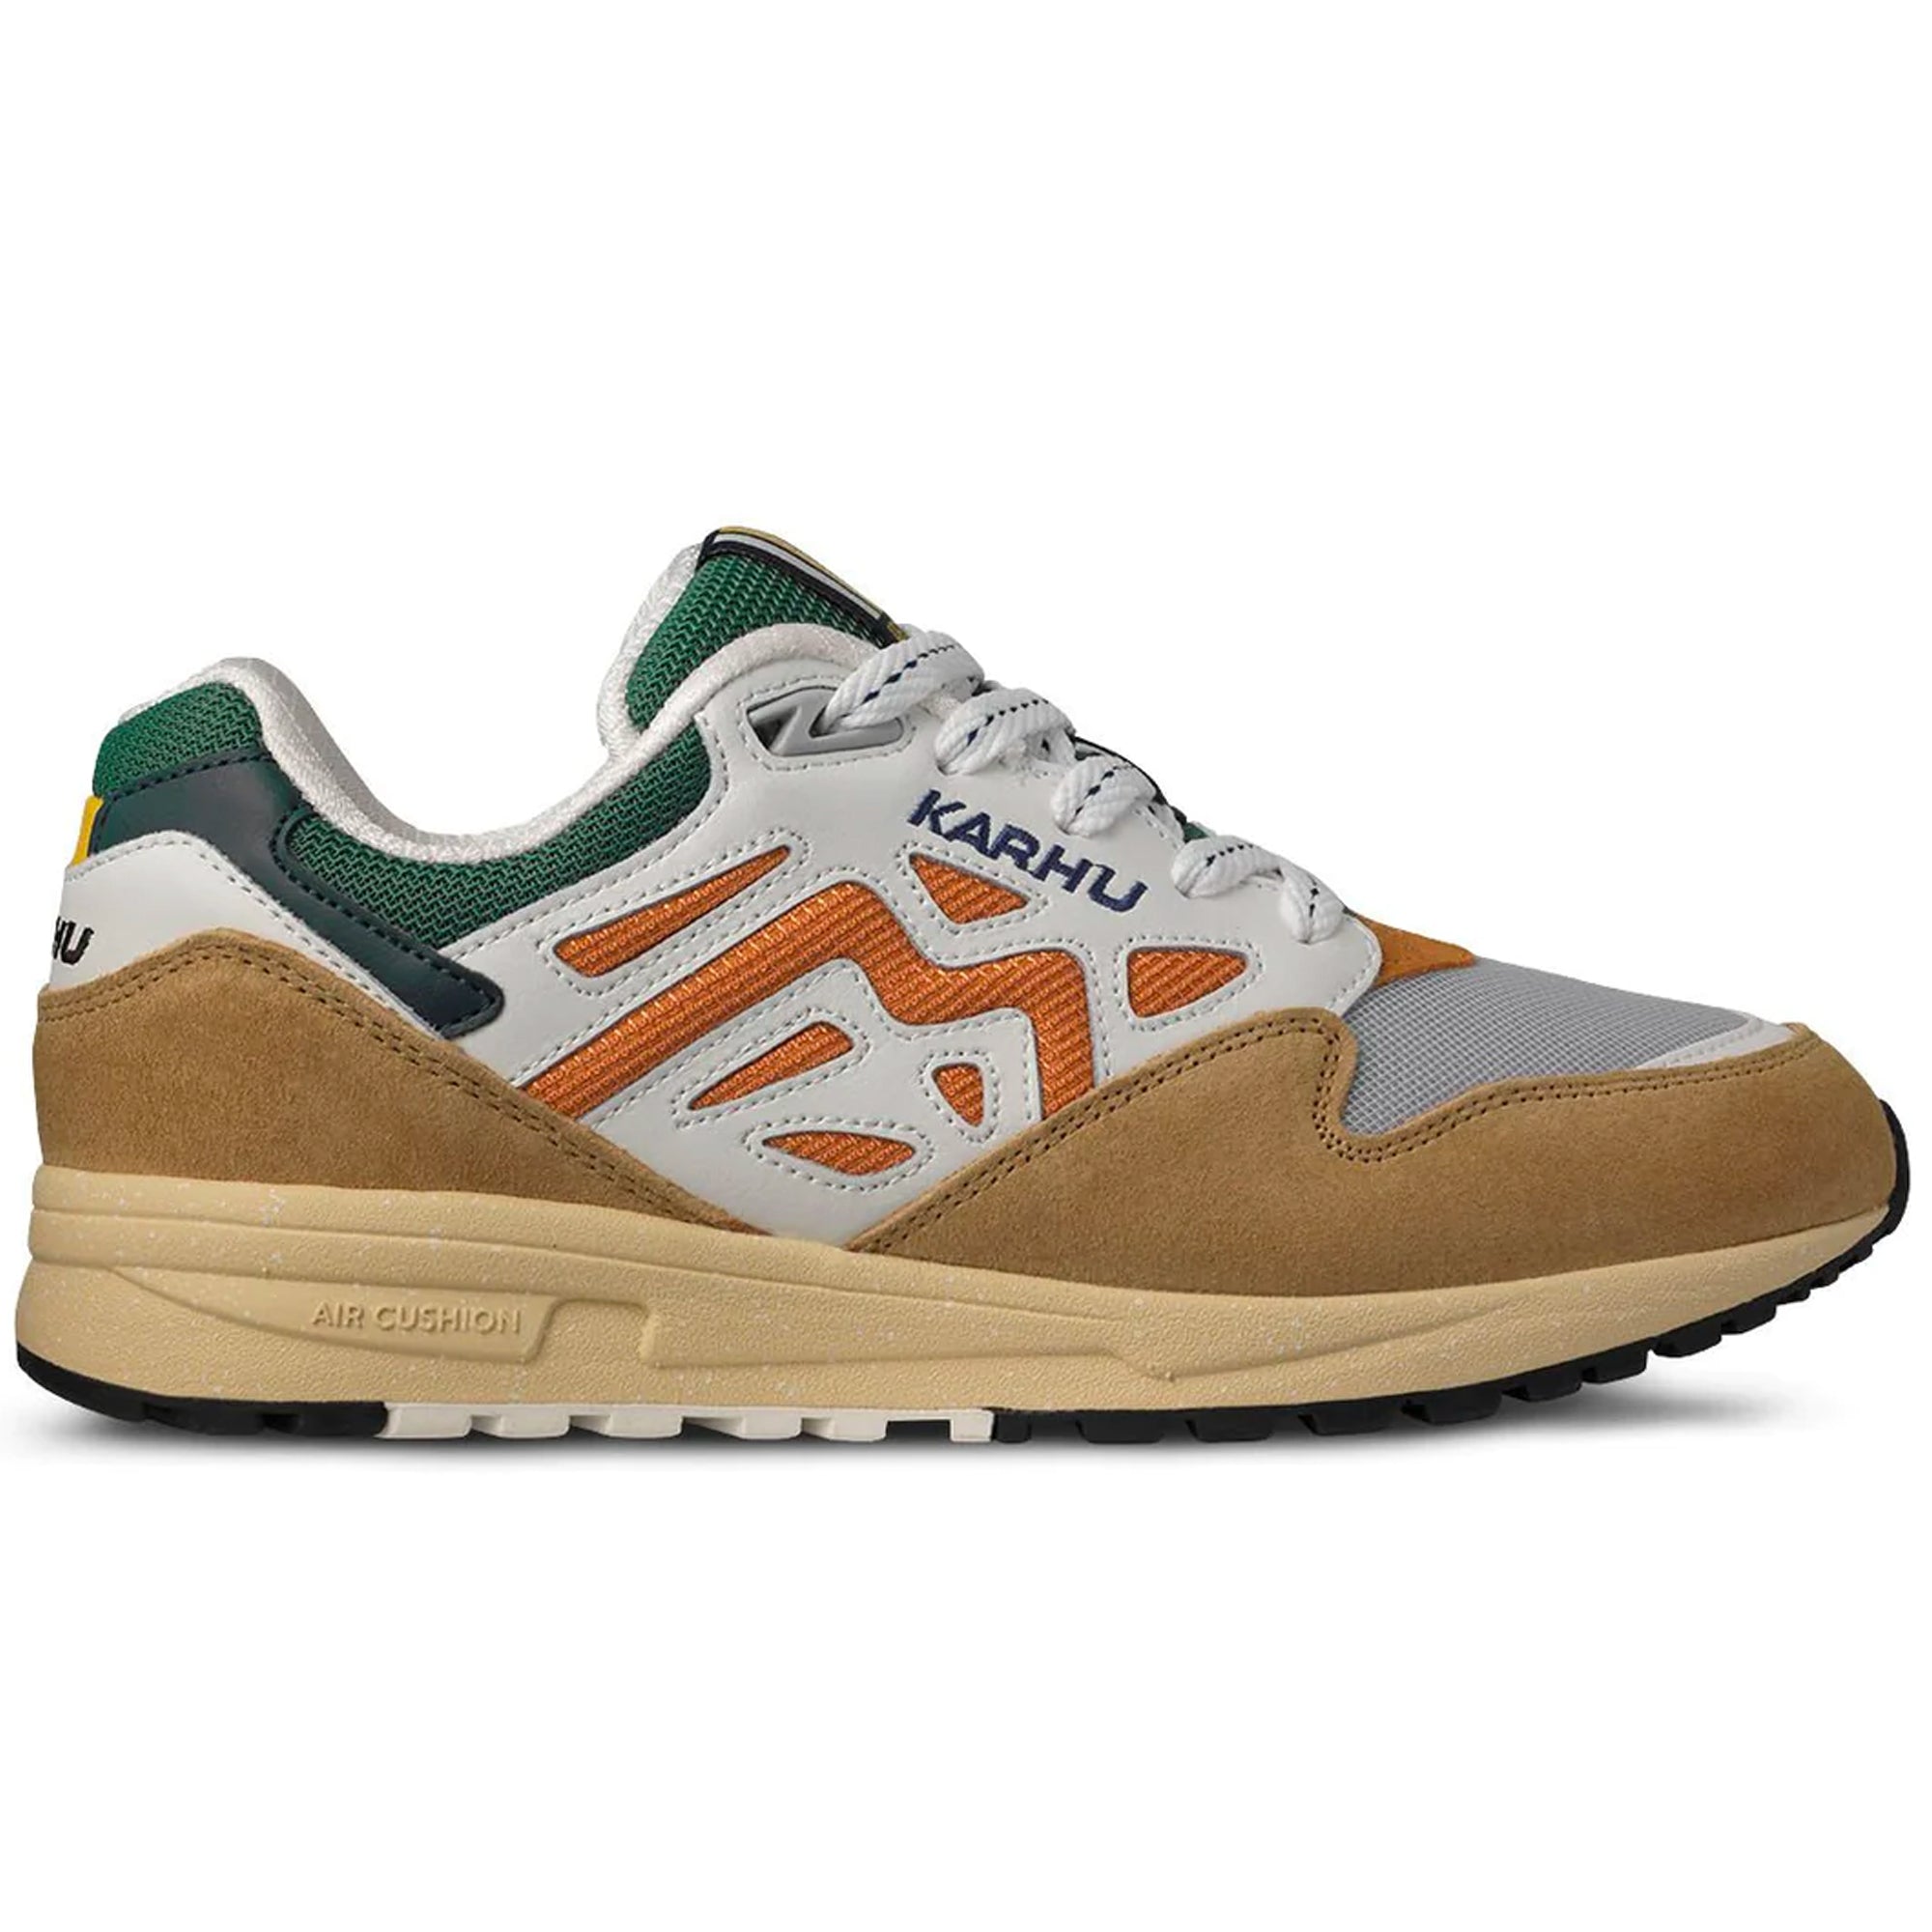 Karhu Legacy 96 Trainers 'The Forest Rules Pack' - Curry / Nugget